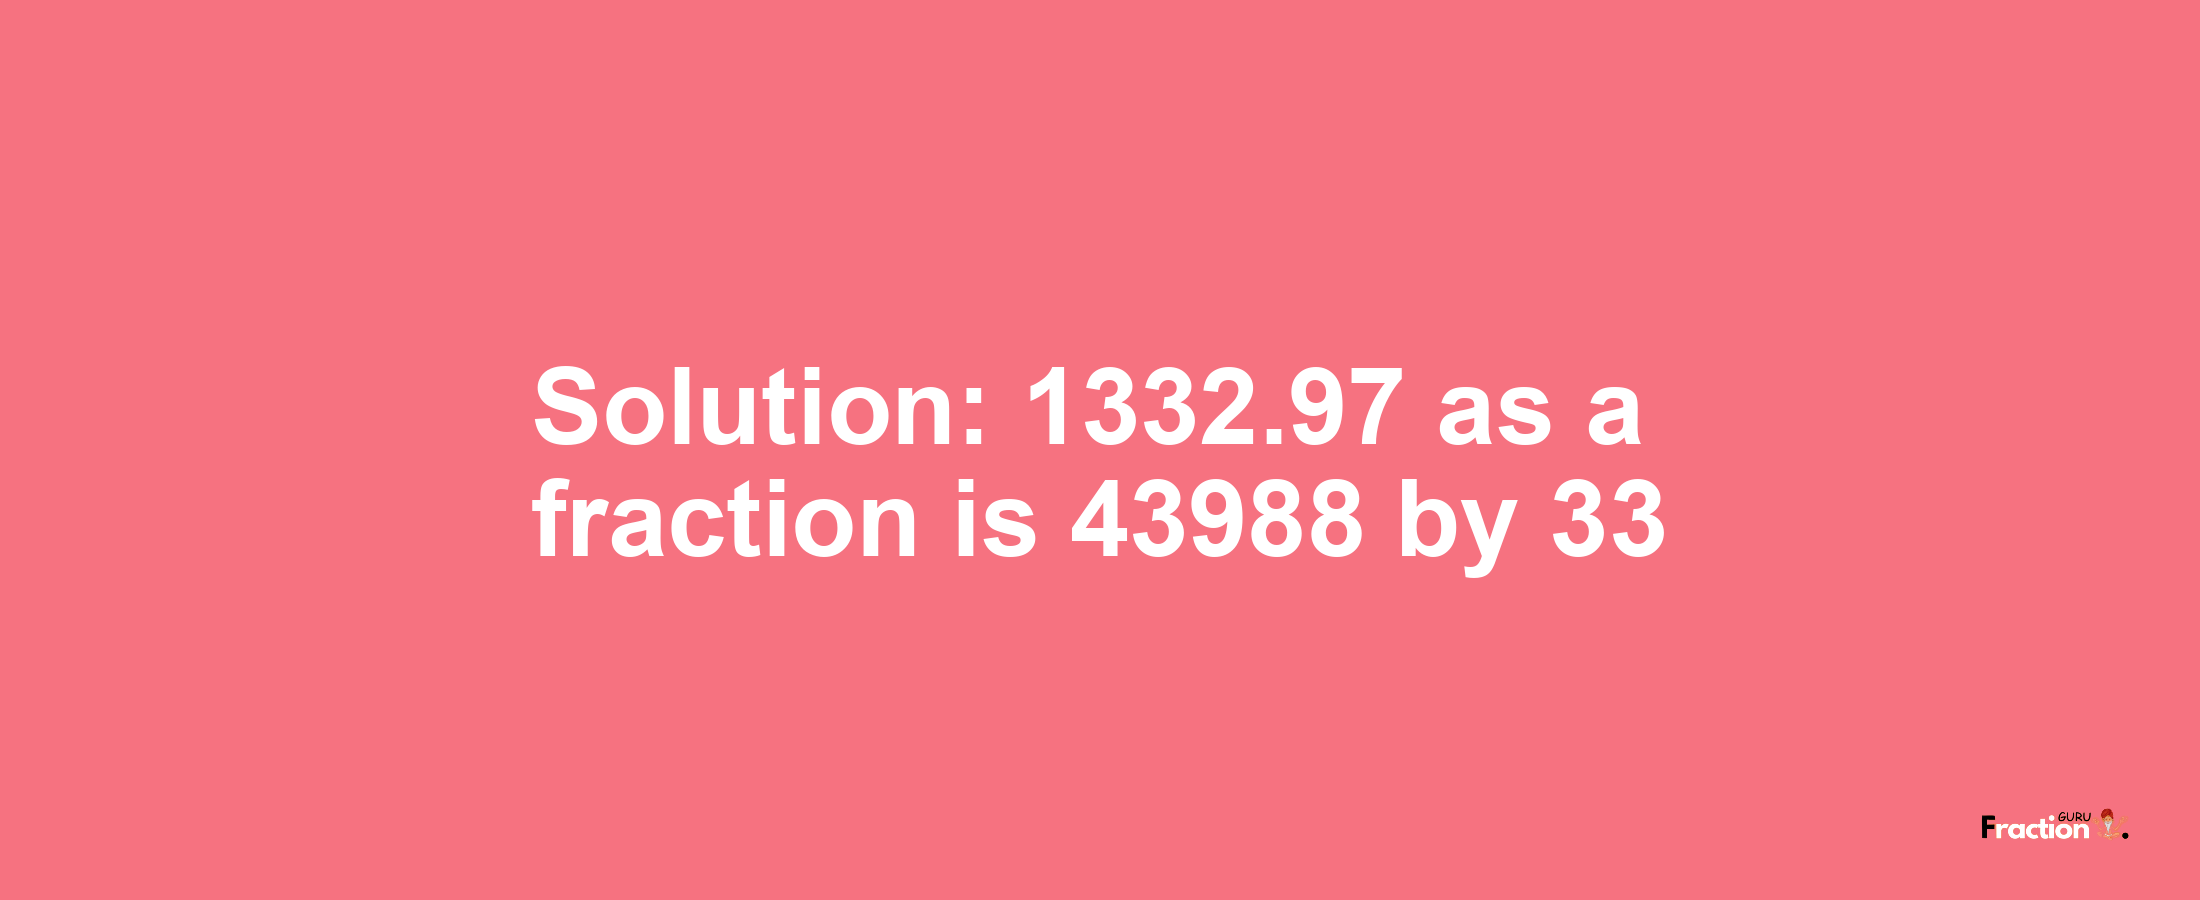 Solution:1332.97 as a fraction is 43988/33